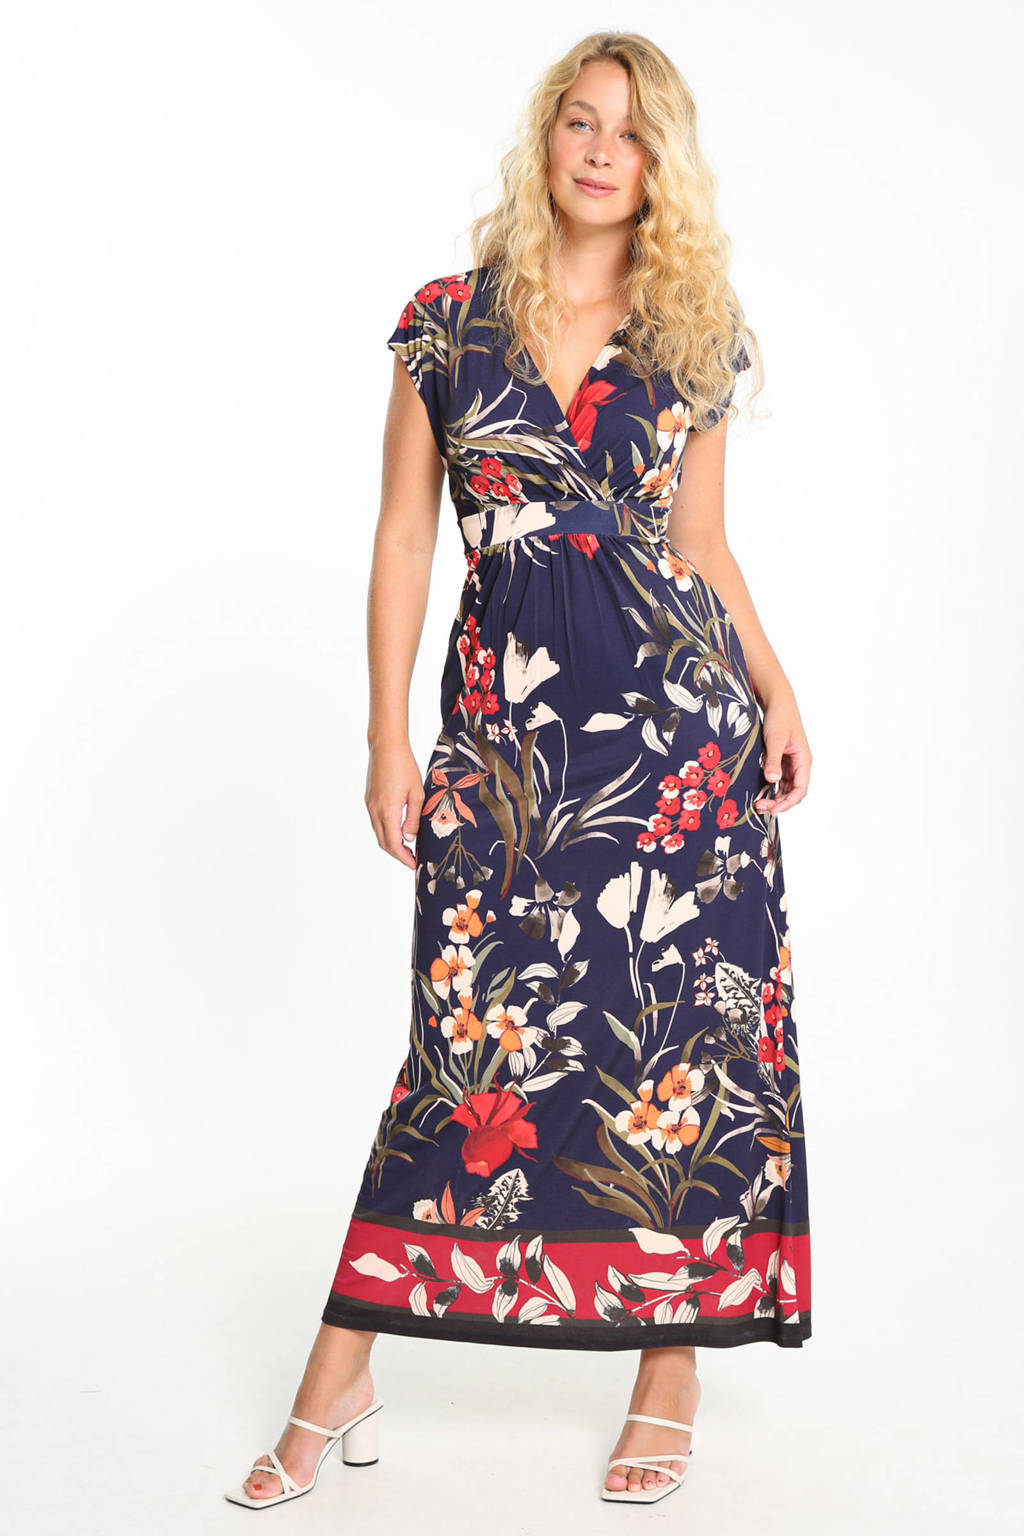 Cassis maxi jurk met all over print donkerblauw